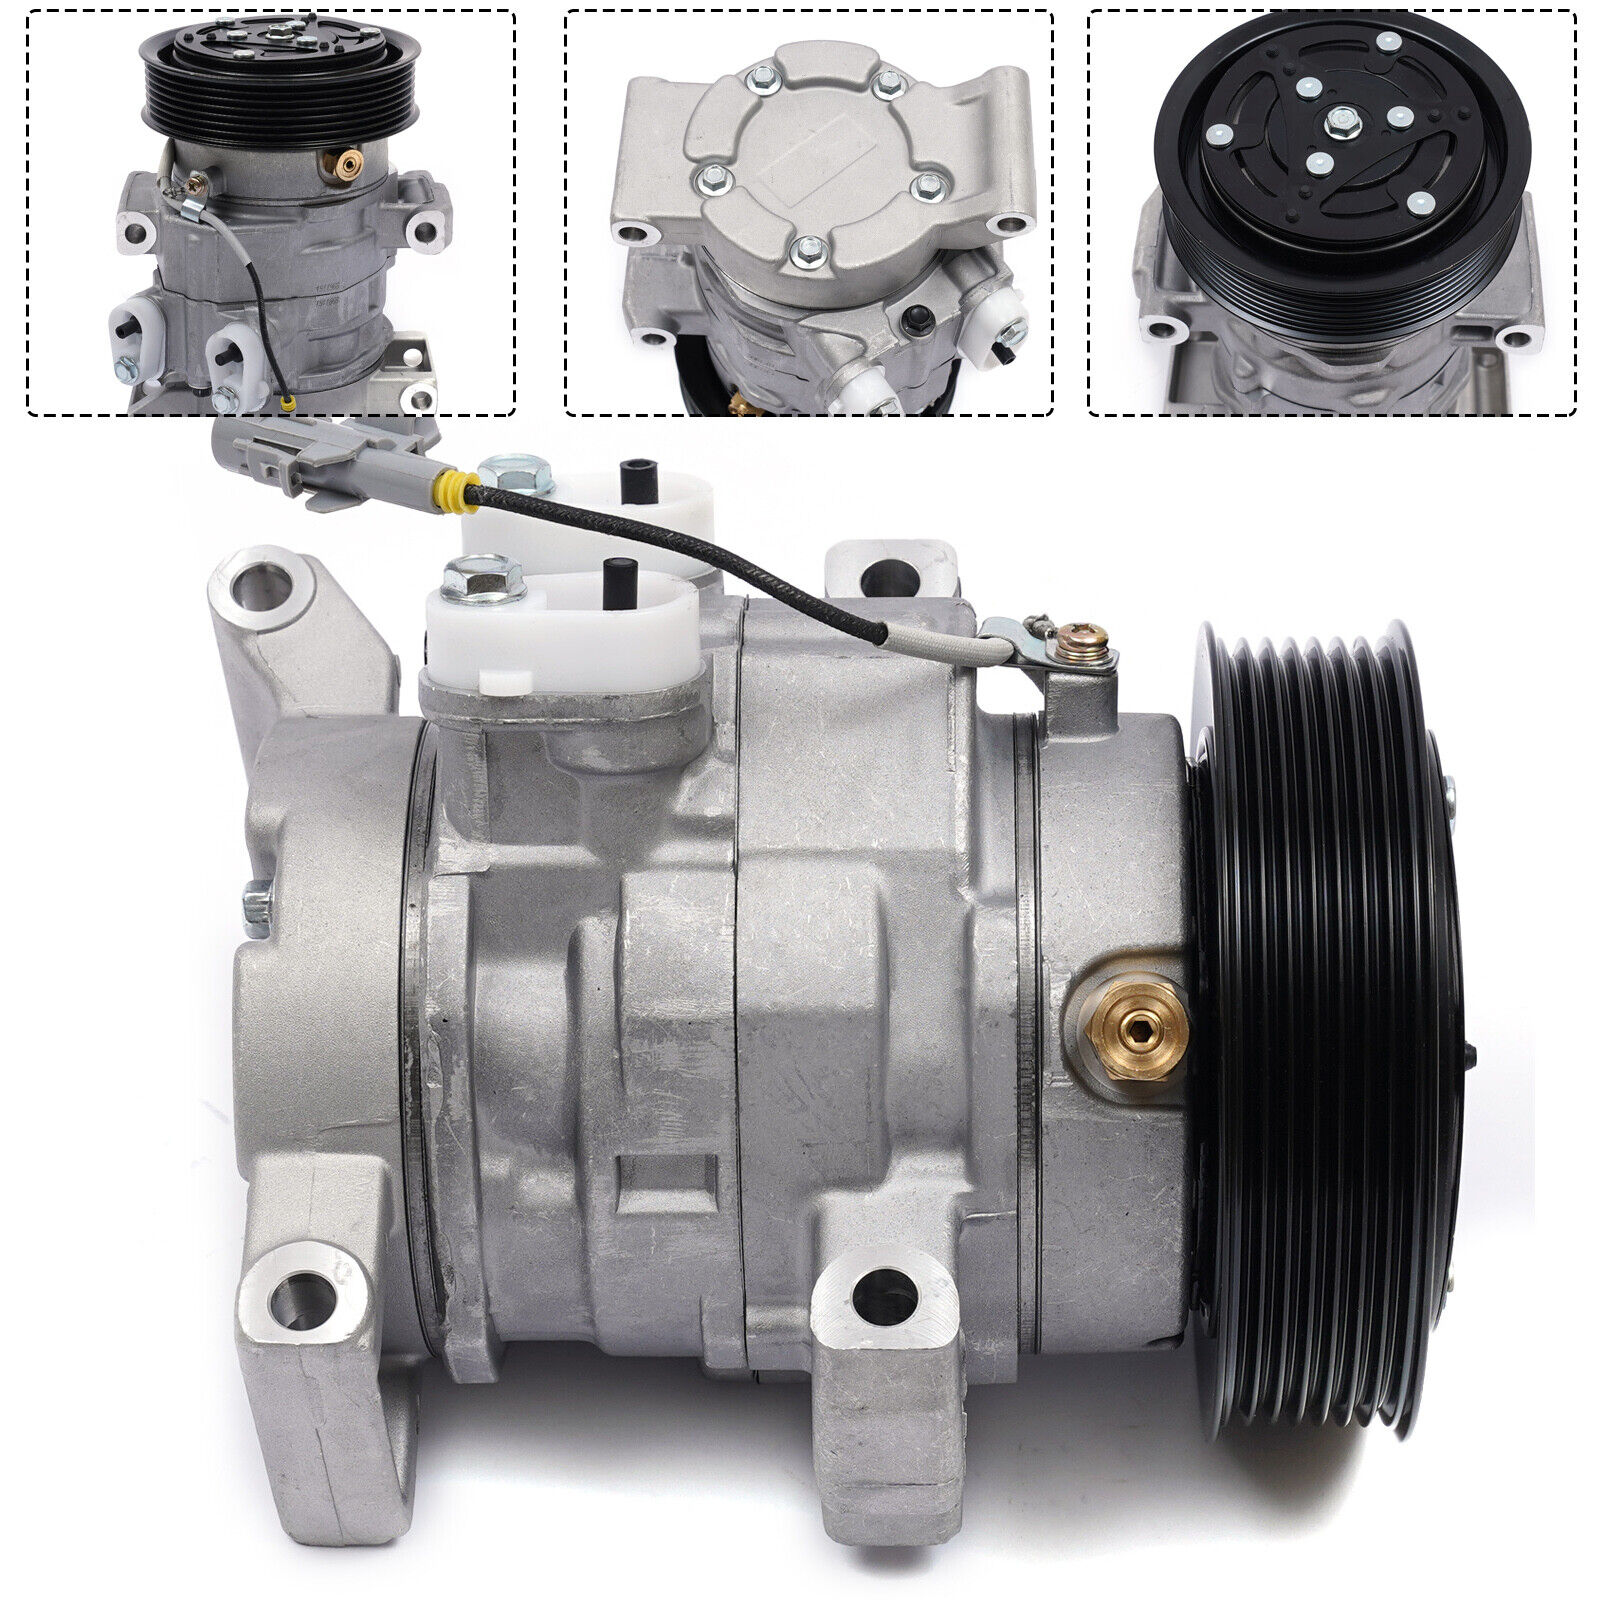 AC Compressor with Cluth Direct Replacement For Toyota Hilux 2.5L & 3.0L Engines